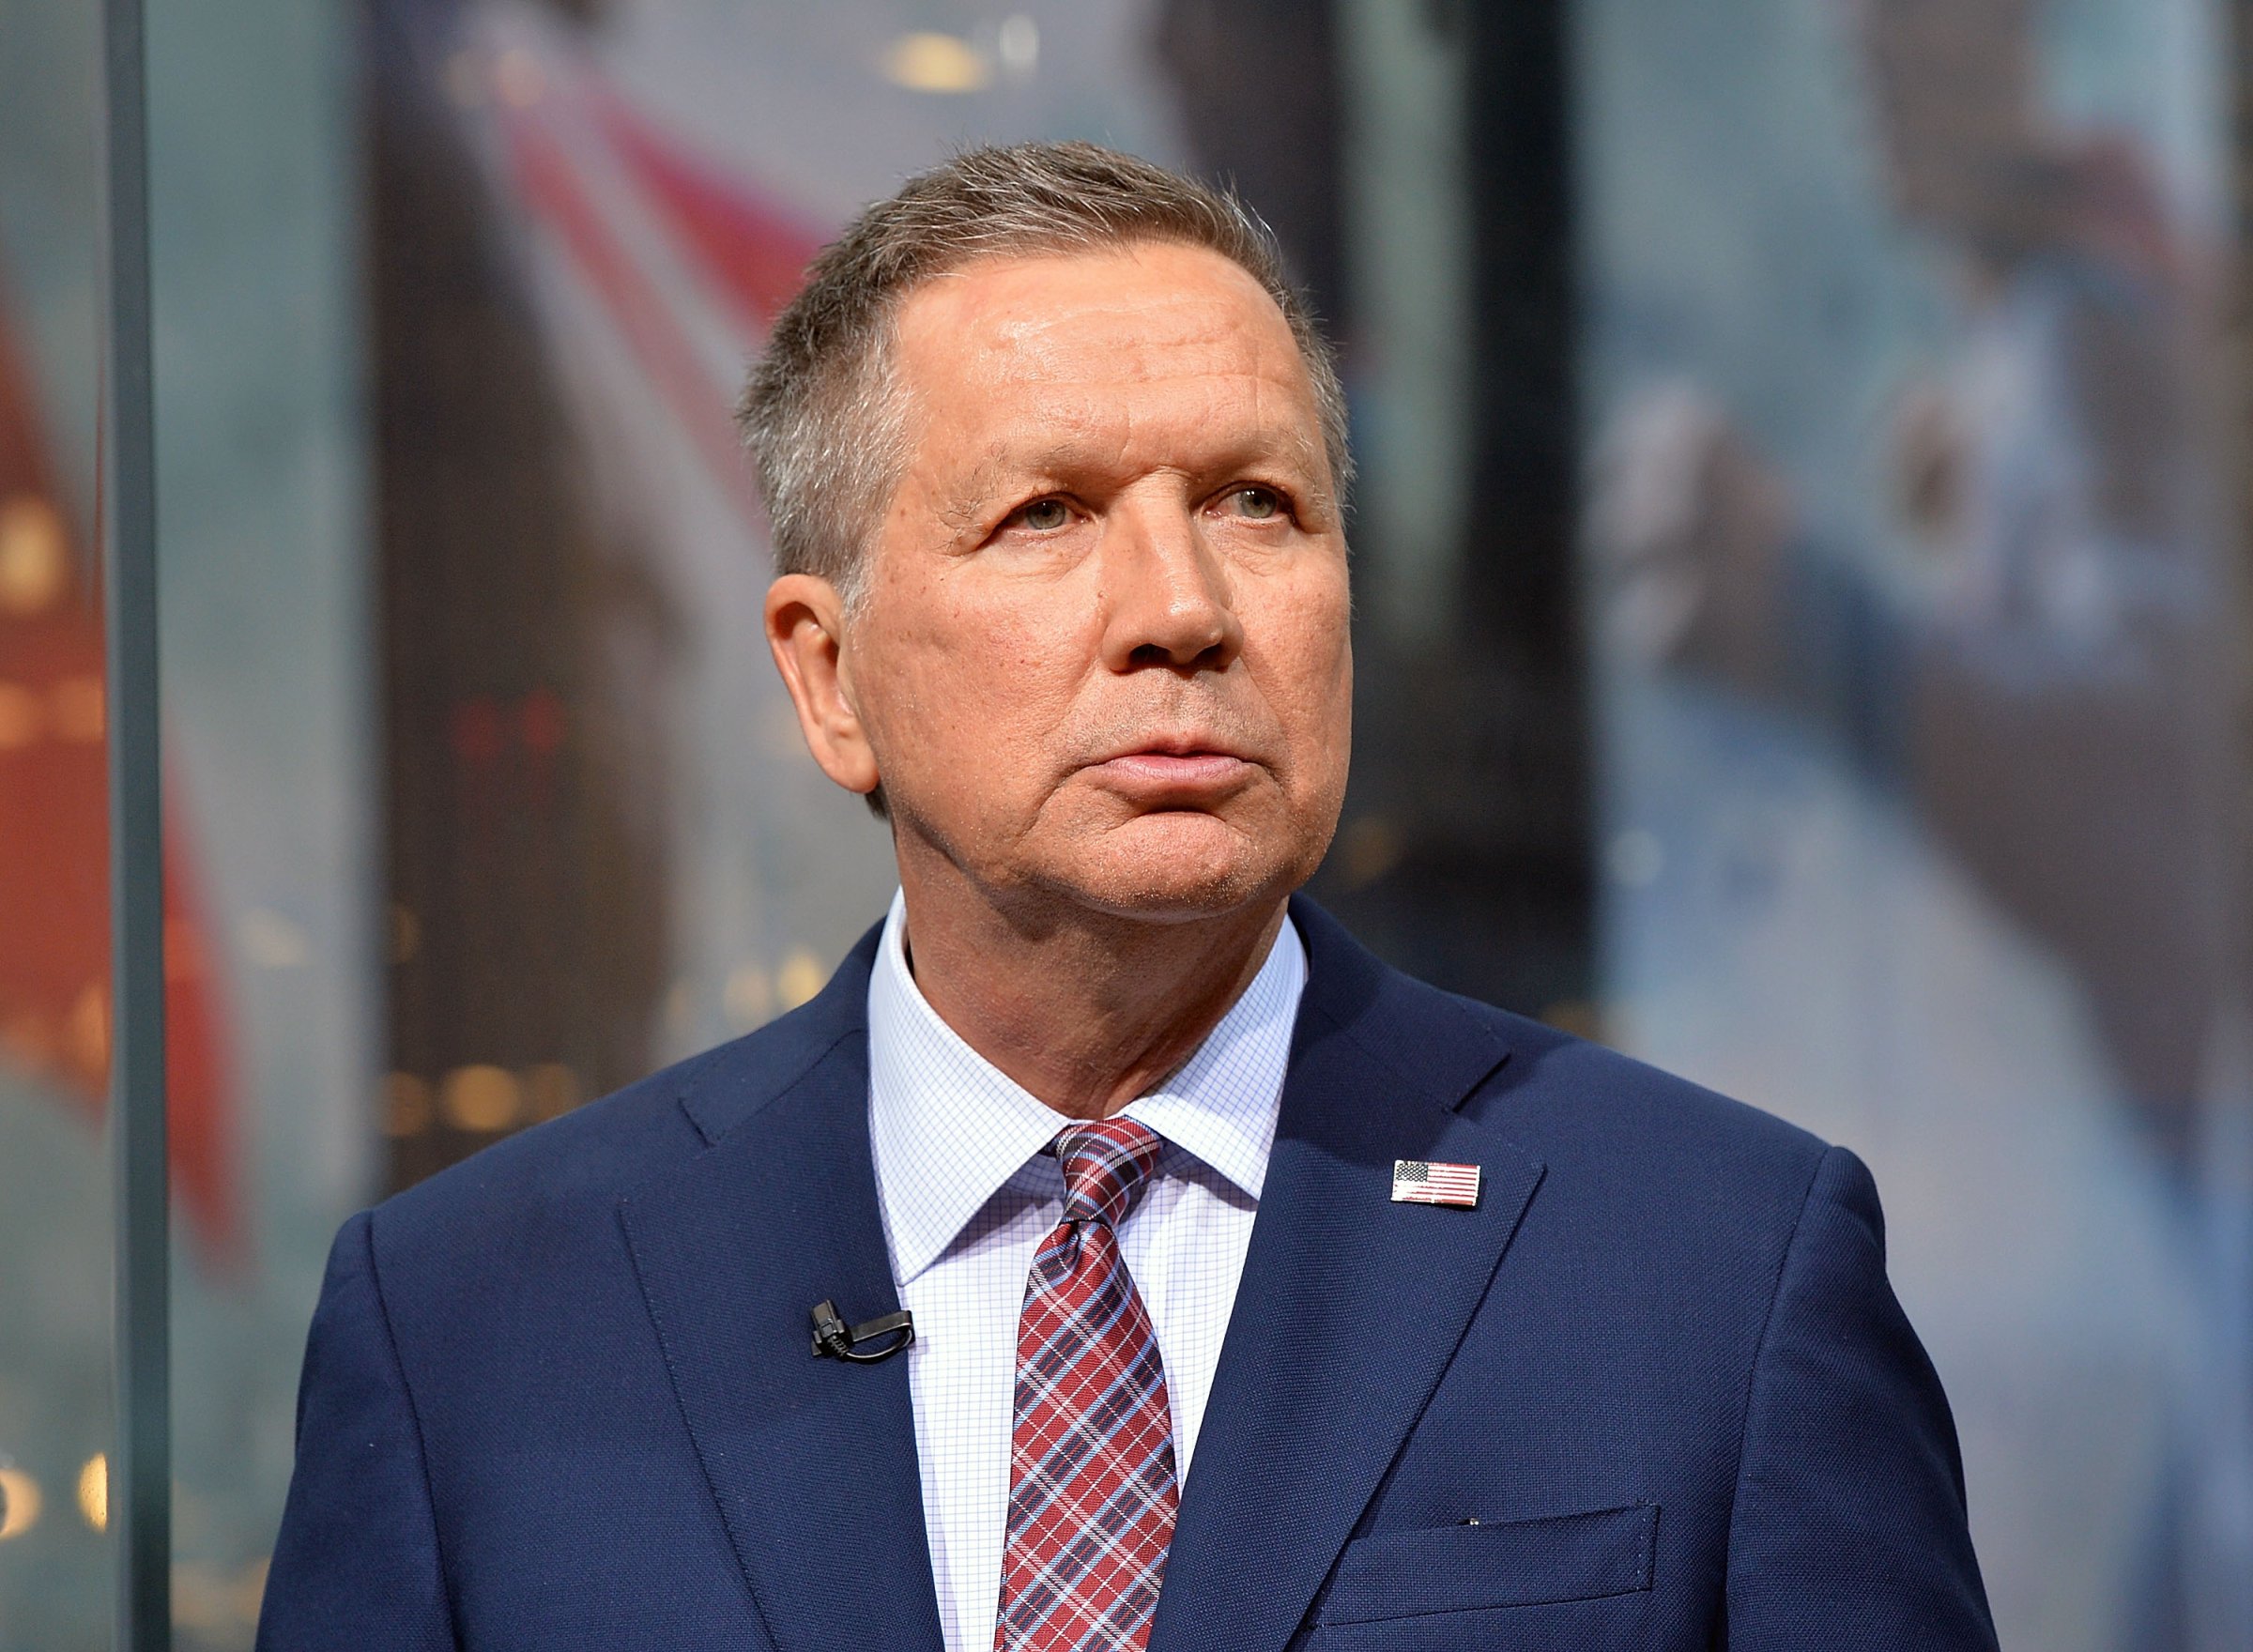 Republican Presidential Candidate, Governor John Kasich visits "Extra" at H&M Times Square on April 7, 2016 in New York City.